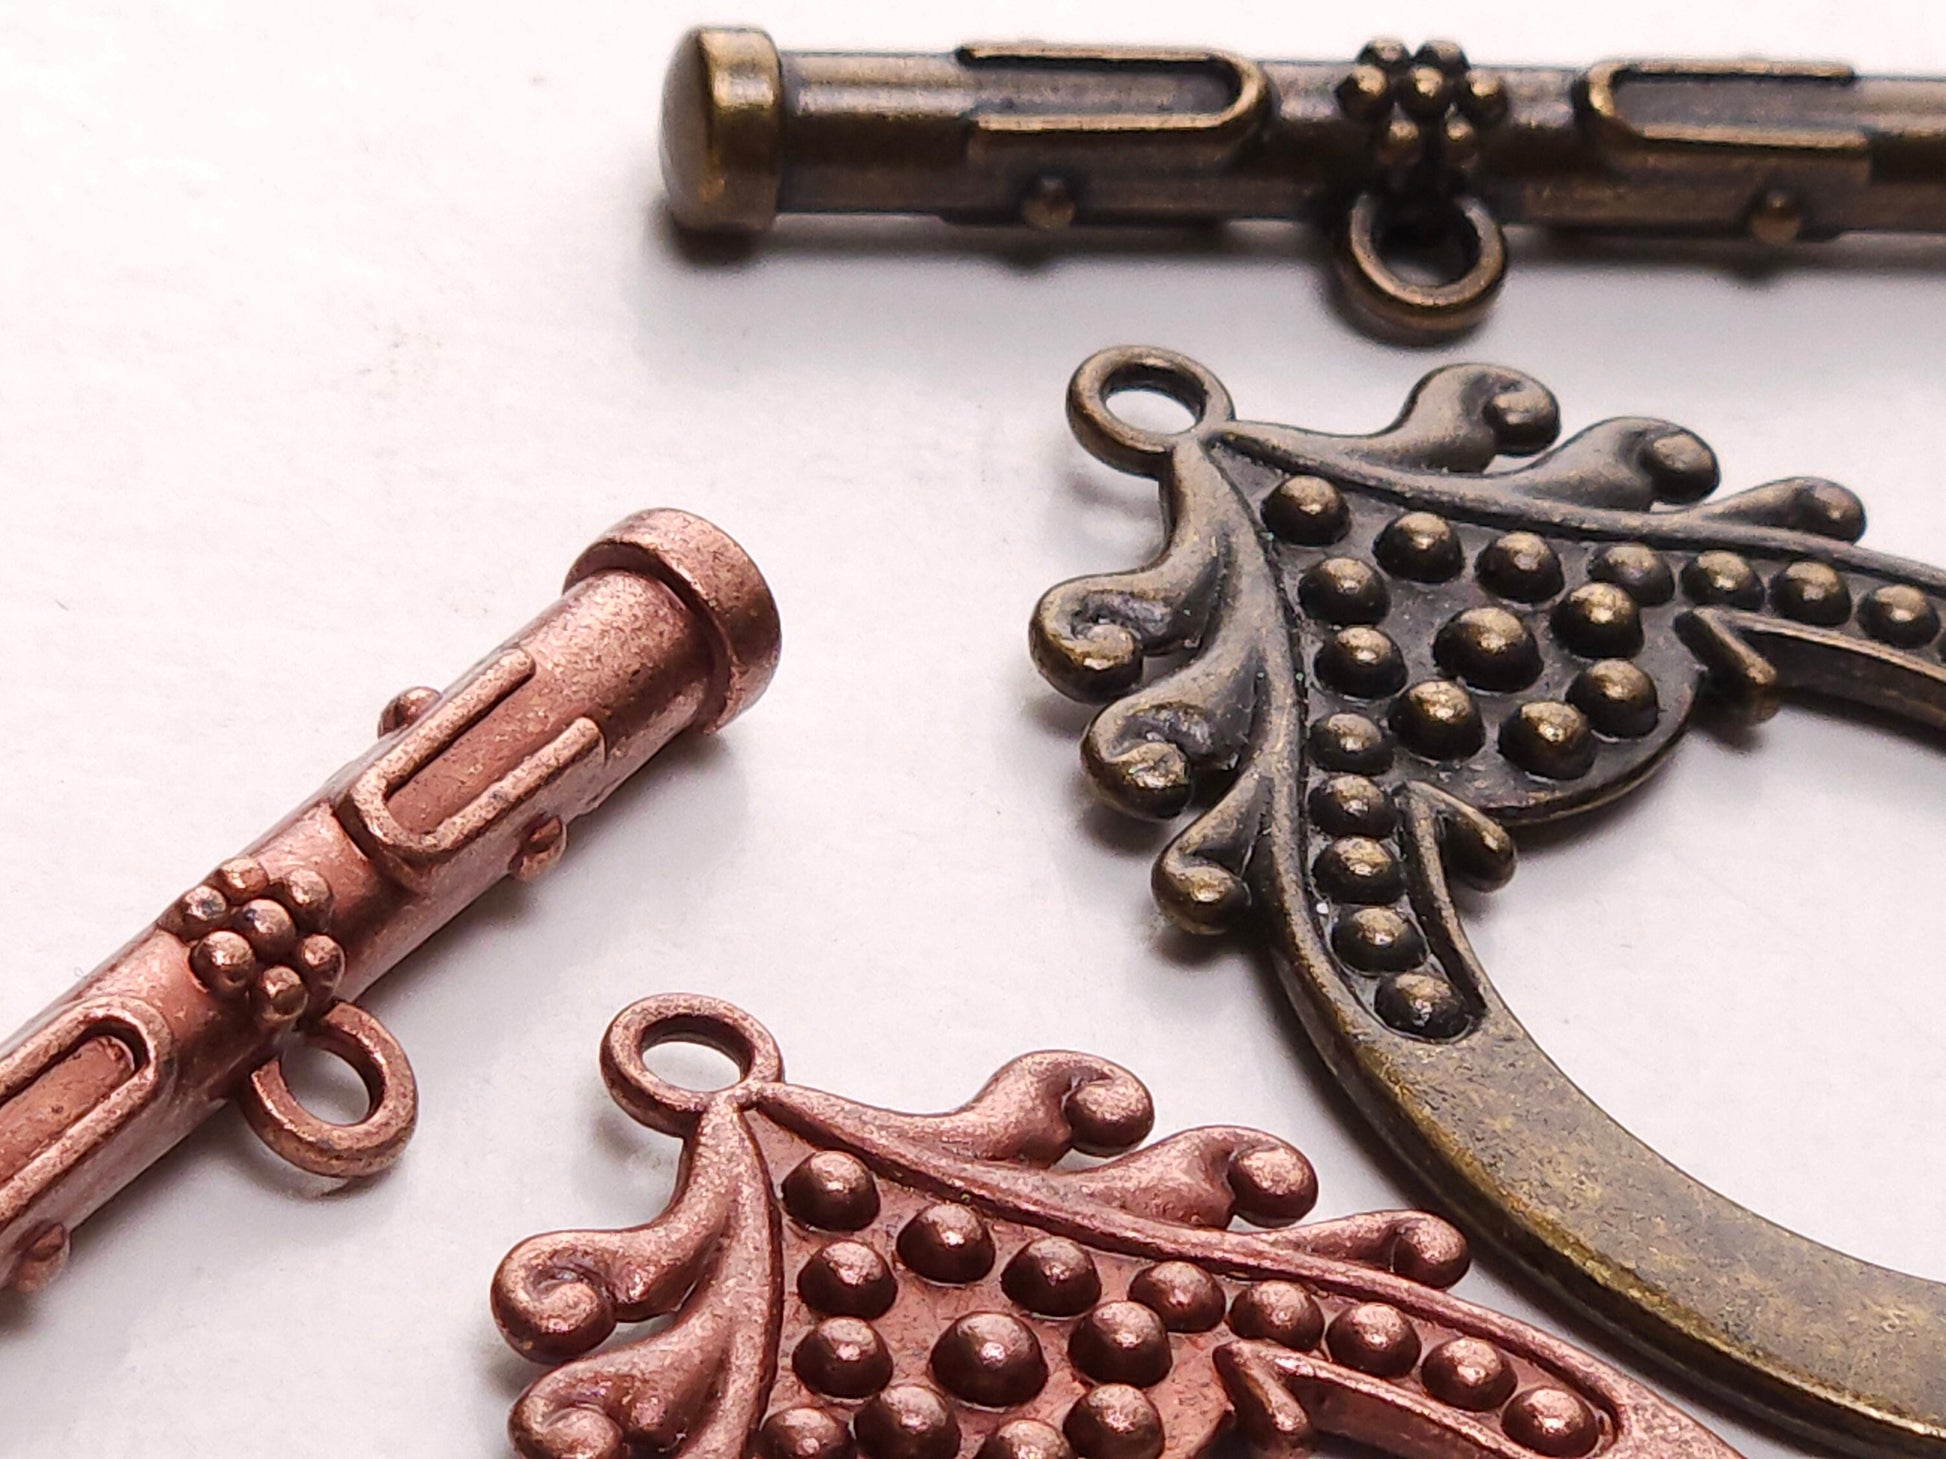 Antique Brass, Copper largeToggle clasp, 50mm Fancy drop & bar, use for pendant drop, focal or as Clasp. 1 set